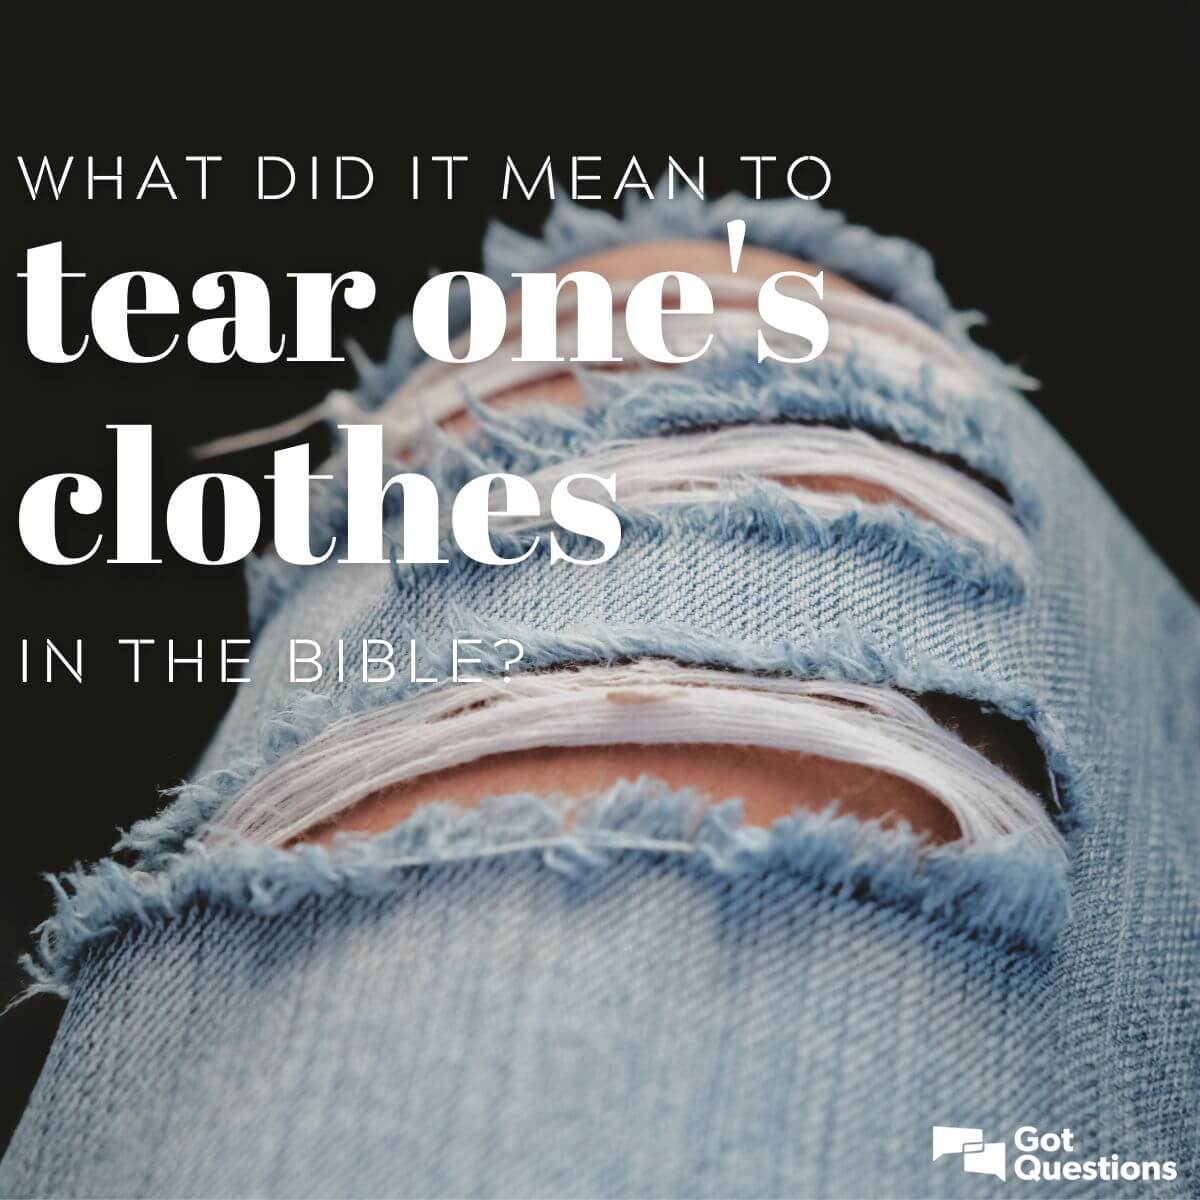 What did it mean to tear one’s clothes in the Bible? | GotQuestions.org